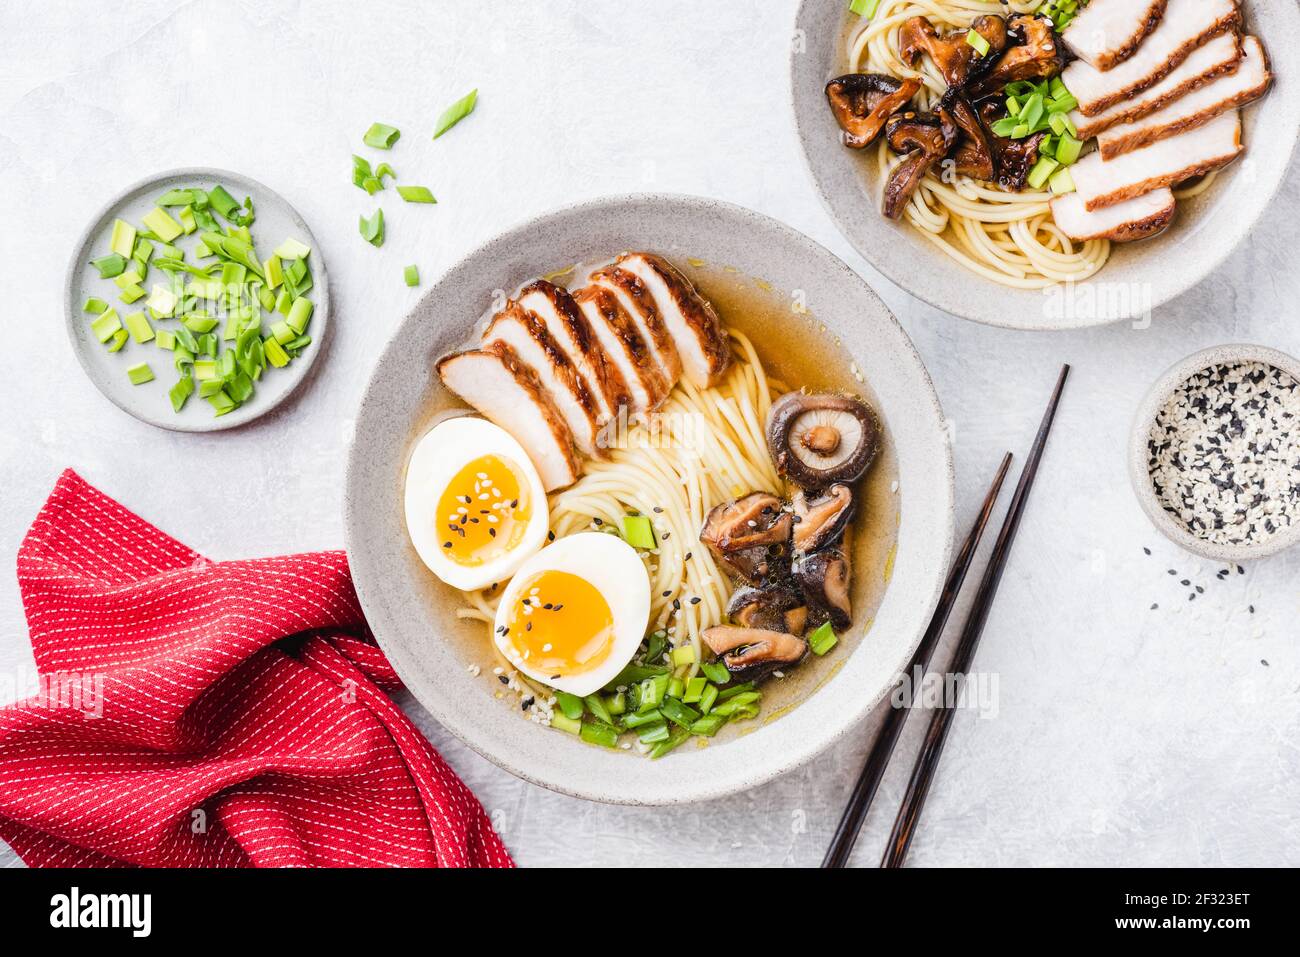 Chicken shiitake ramen noodle soup bowl on a grey concrete background, top view. Asian cuisine food, noodle soup with chicken, shiitake, egg and green Stock Photo